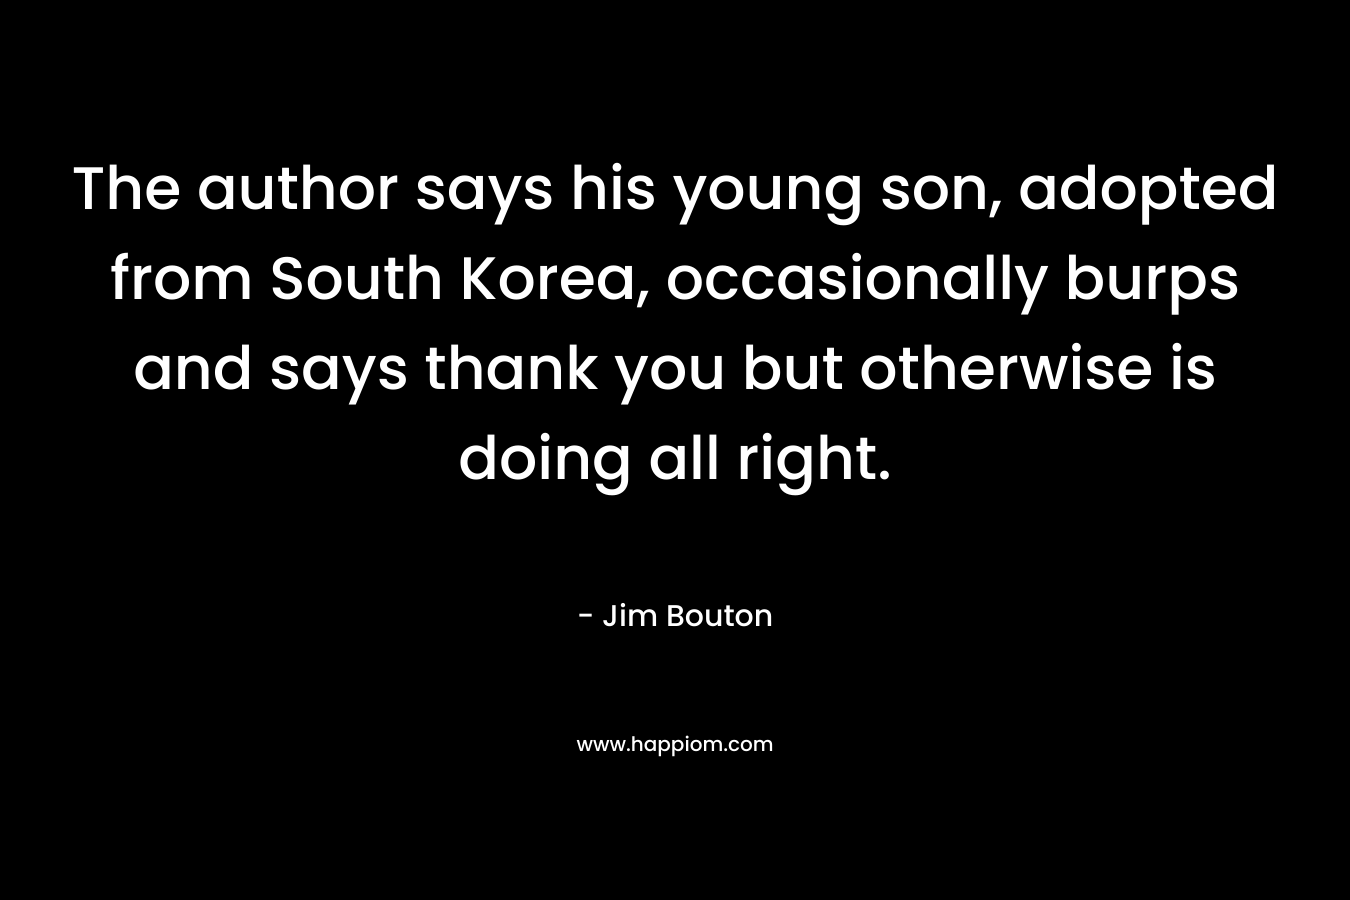 The author says his young son, adopted from South Korea, occasionally burps and says thank you but otherwise is doing all right.